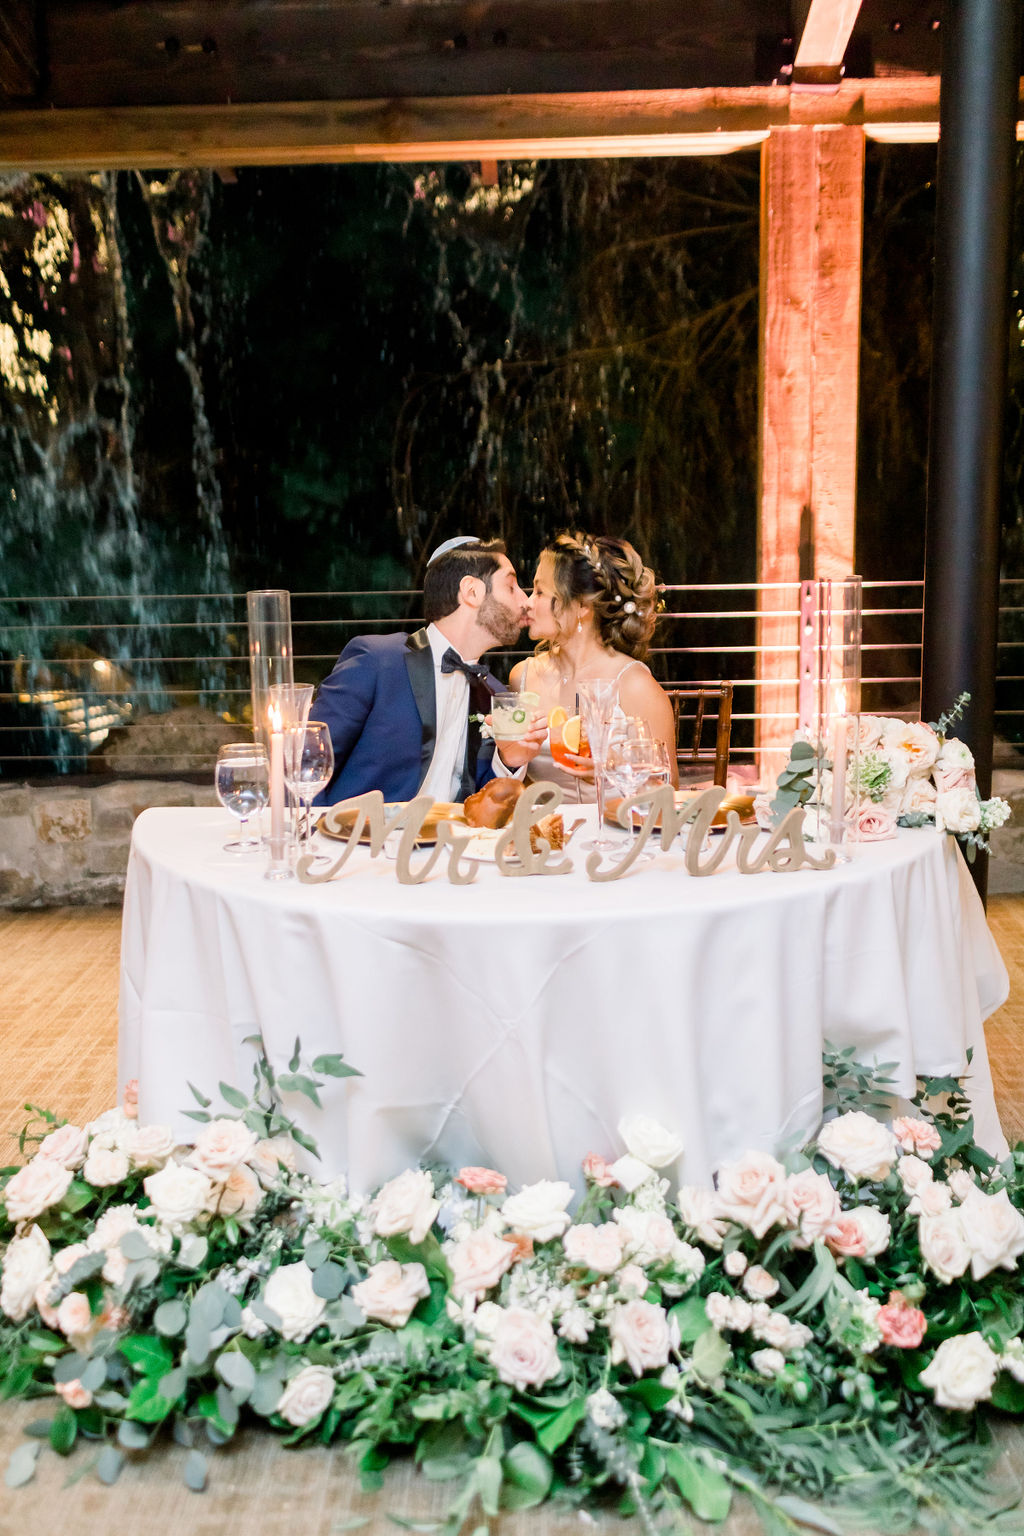 bride and groom kiss at sweetheart table during wedding reception